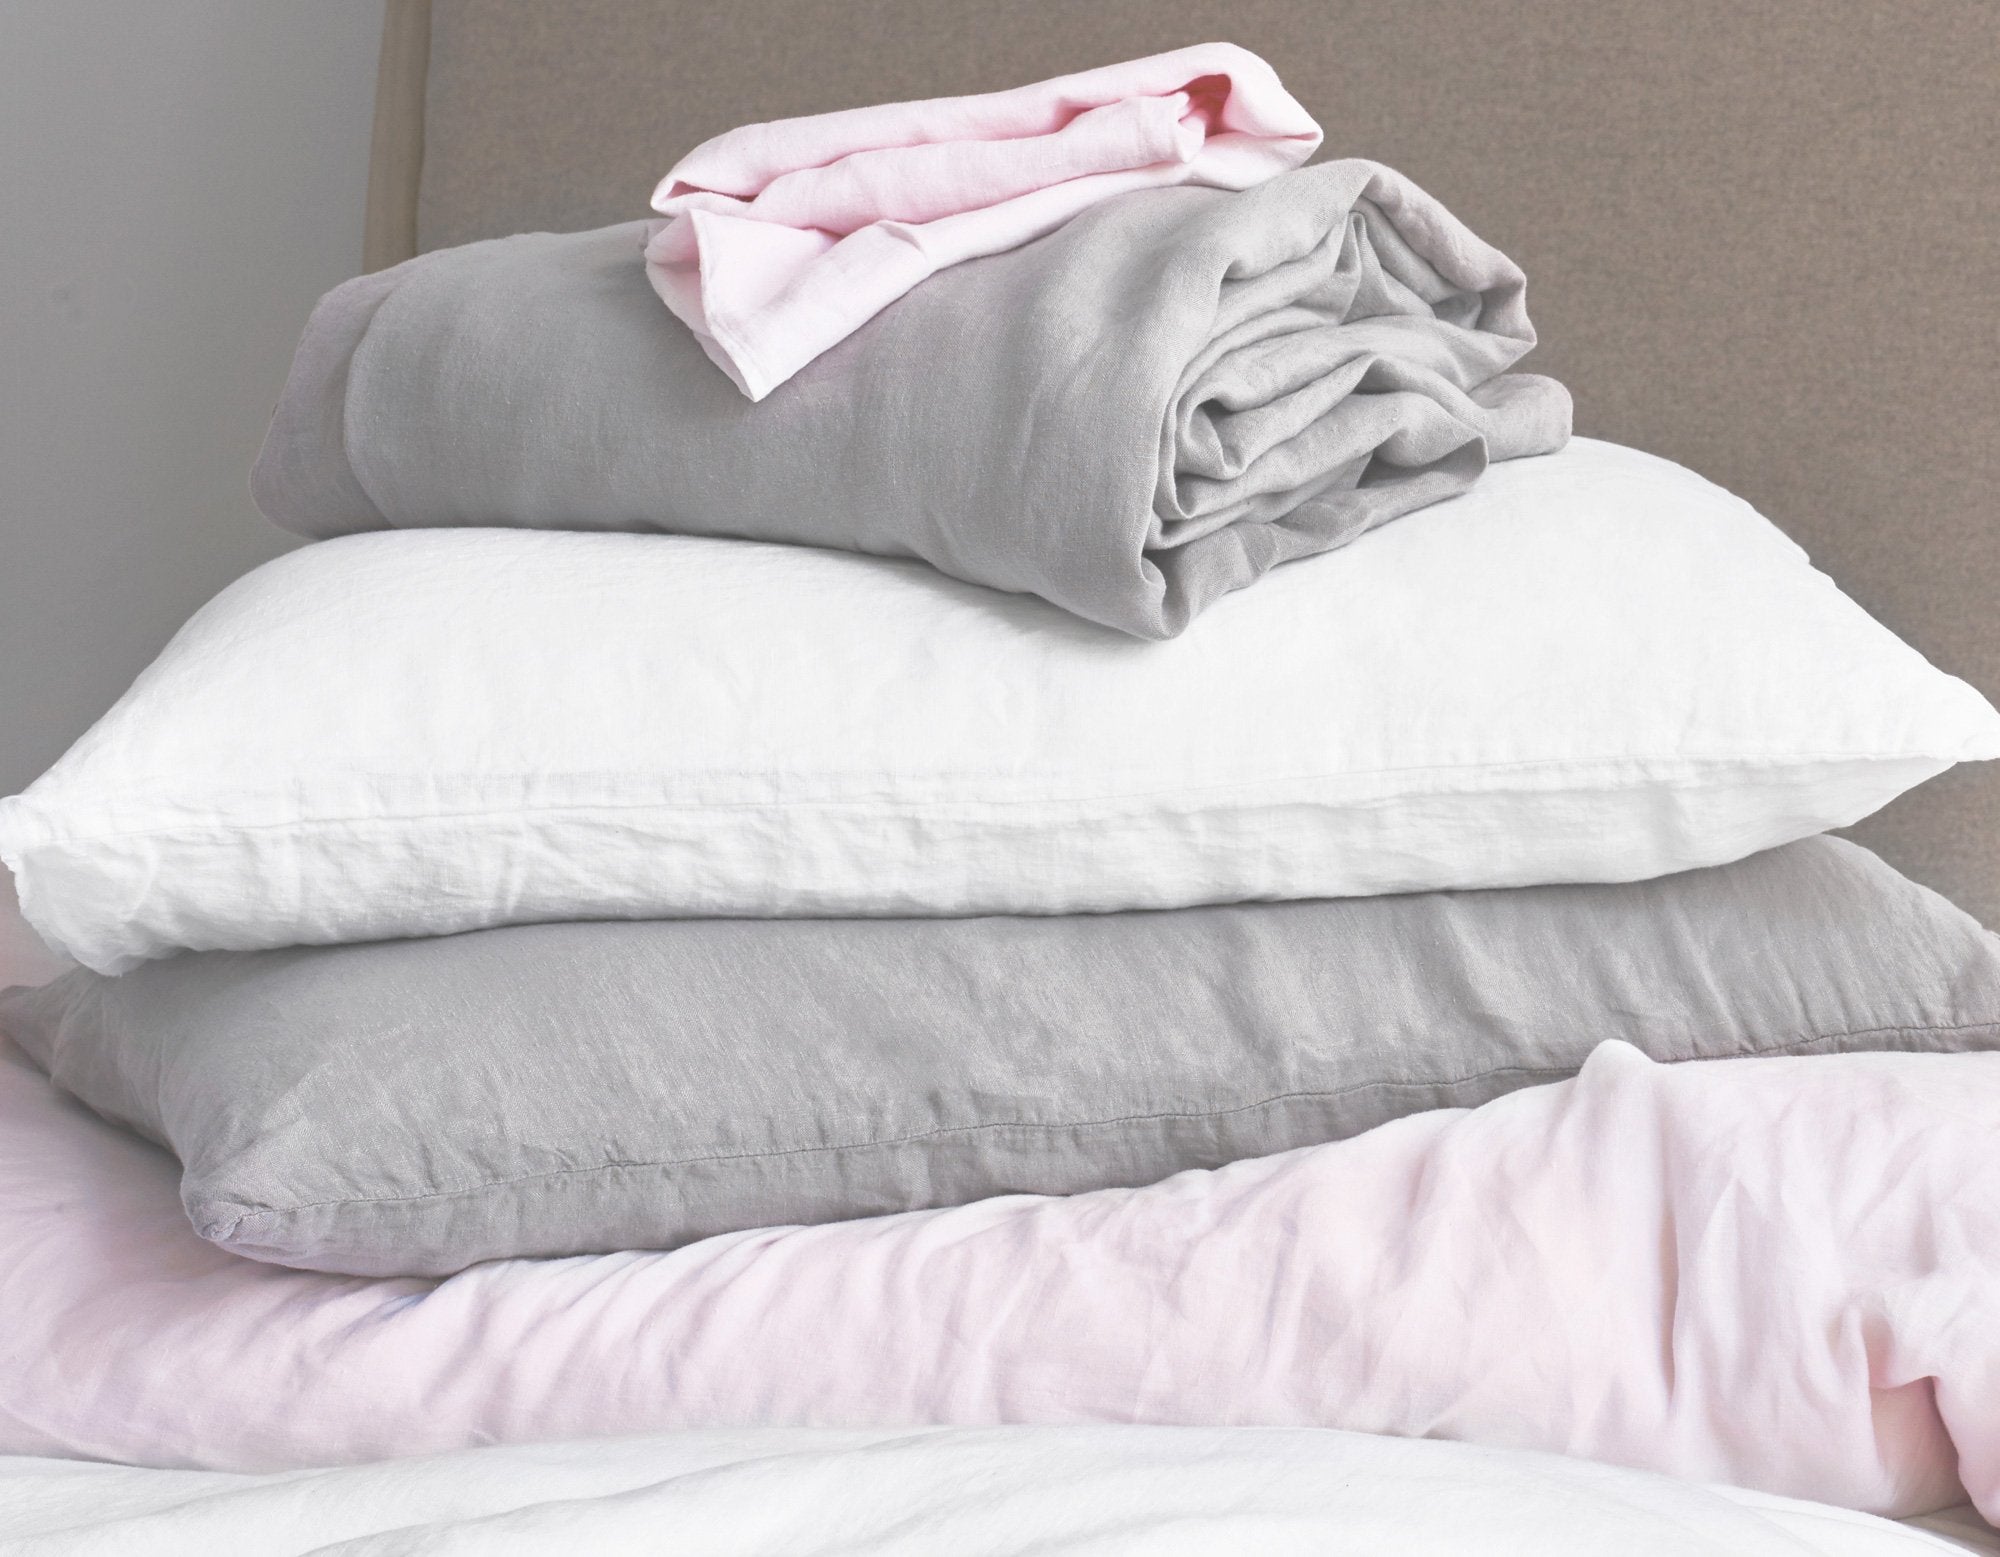 Pile of Linen Bedding in Grey, Pink, White | scooms